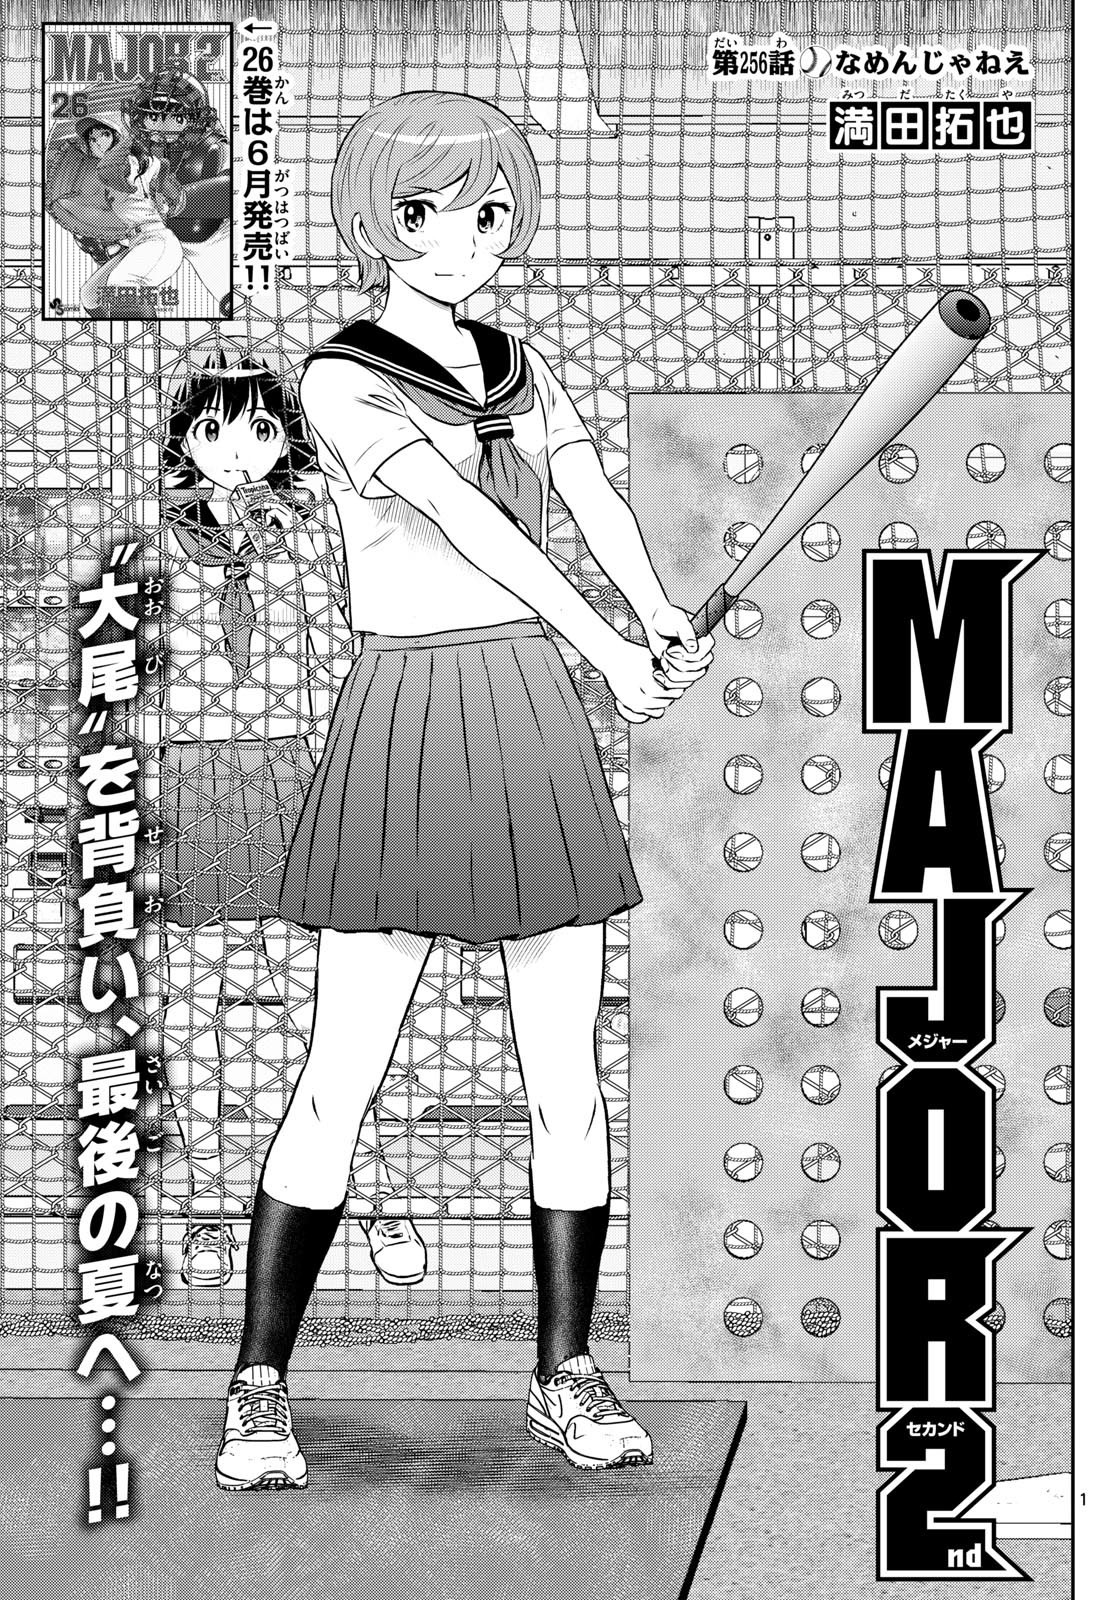 Major 2nd - メジャーセカンド - Chapter 256 - Page 1